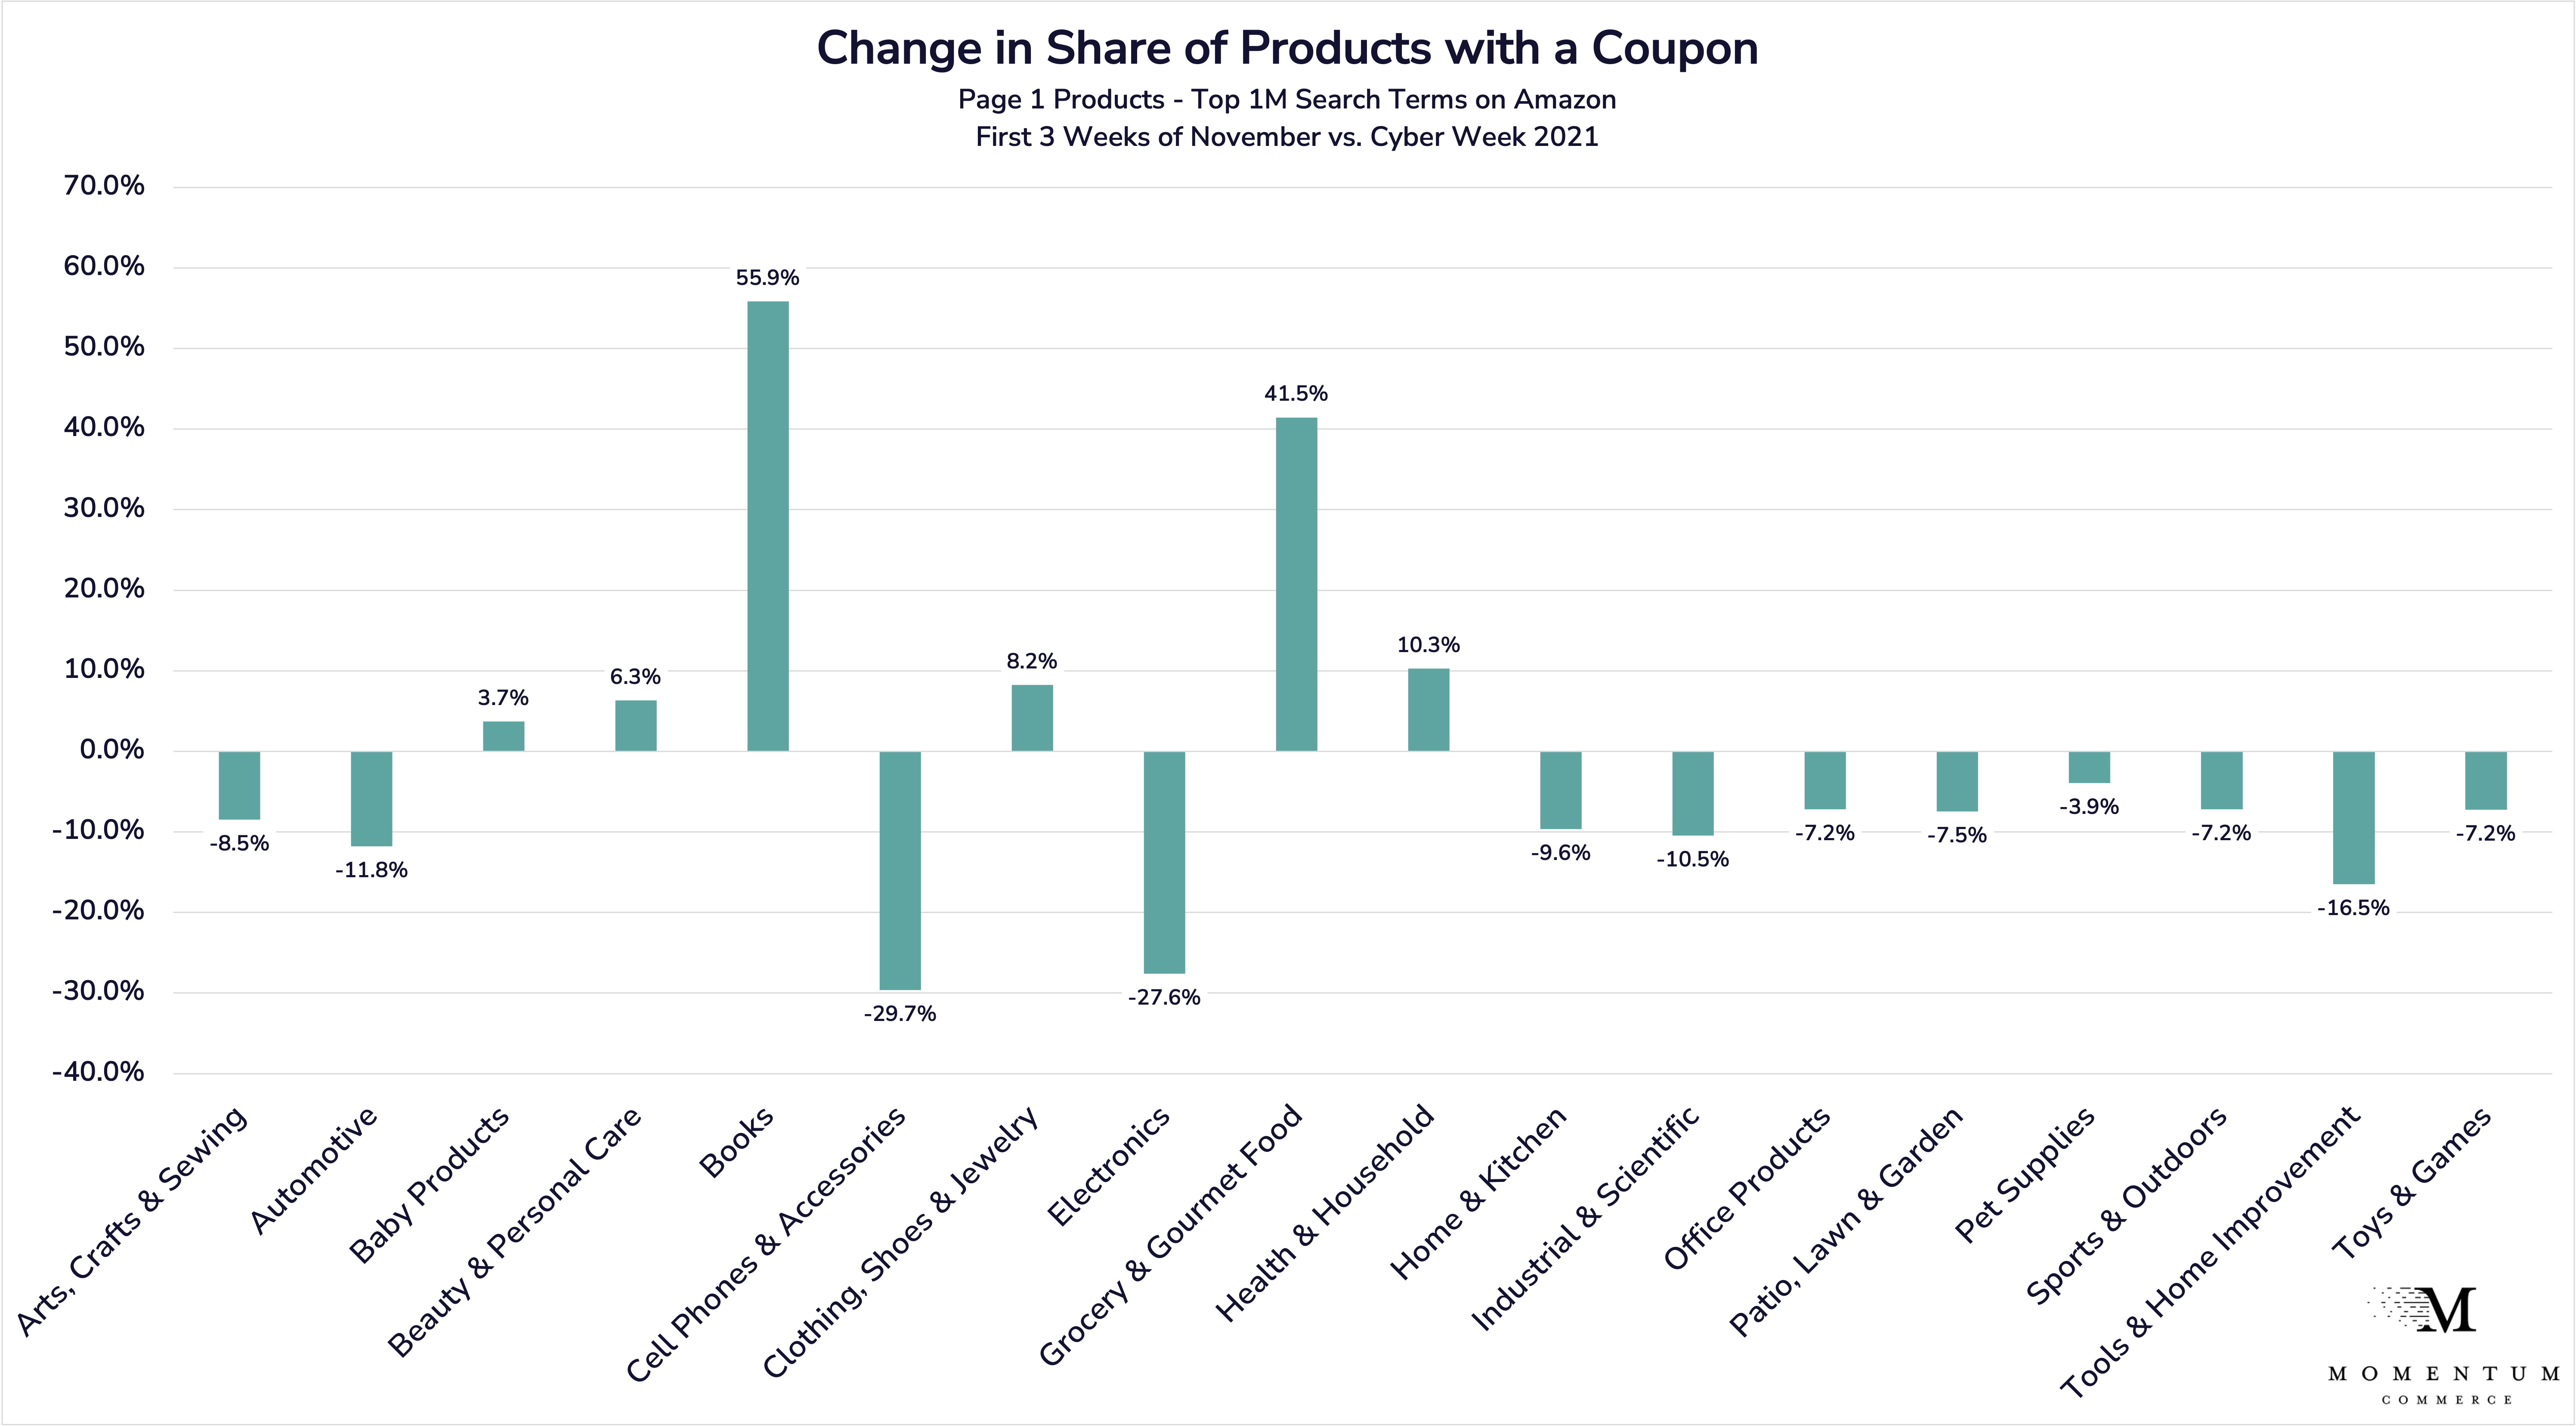 Change in Share of Products with a Coupon